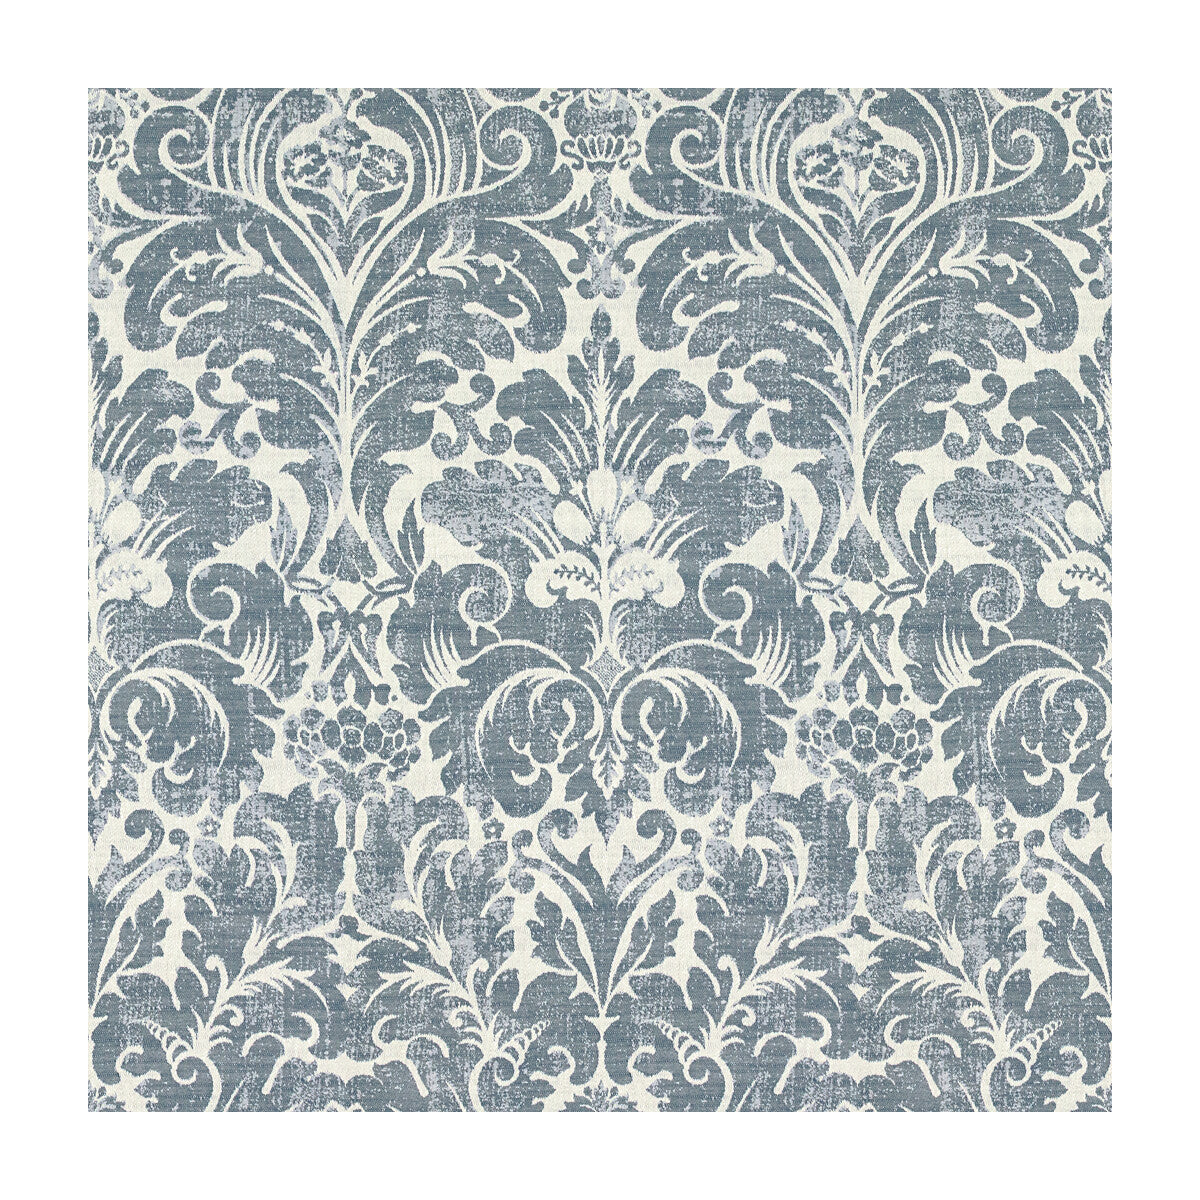 Coeur fabric in vapor color - pattern 31974.5.0 - by Kravet Basics in the Candice Olson collection